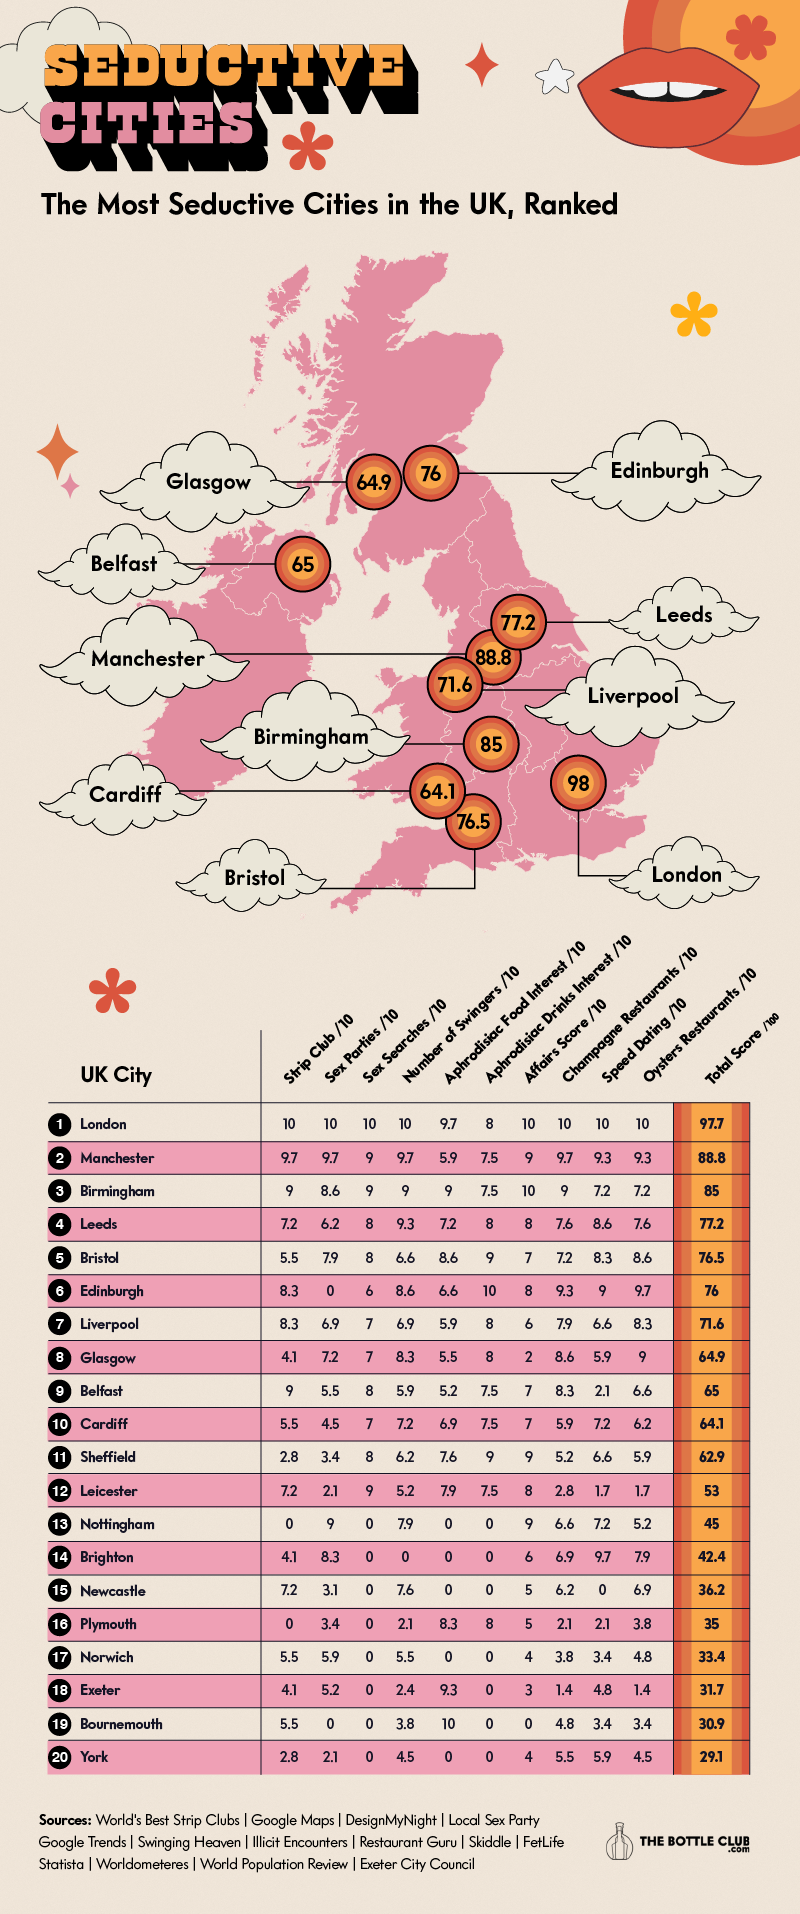 A map and table ranking of the UK's most seductive cities. The ranking is based on a number of factors including number of strip clubs, sex parties, number of swingers, Google searches for 'sex', number of speed dating events, and searches for aphrodisiac food and drink.